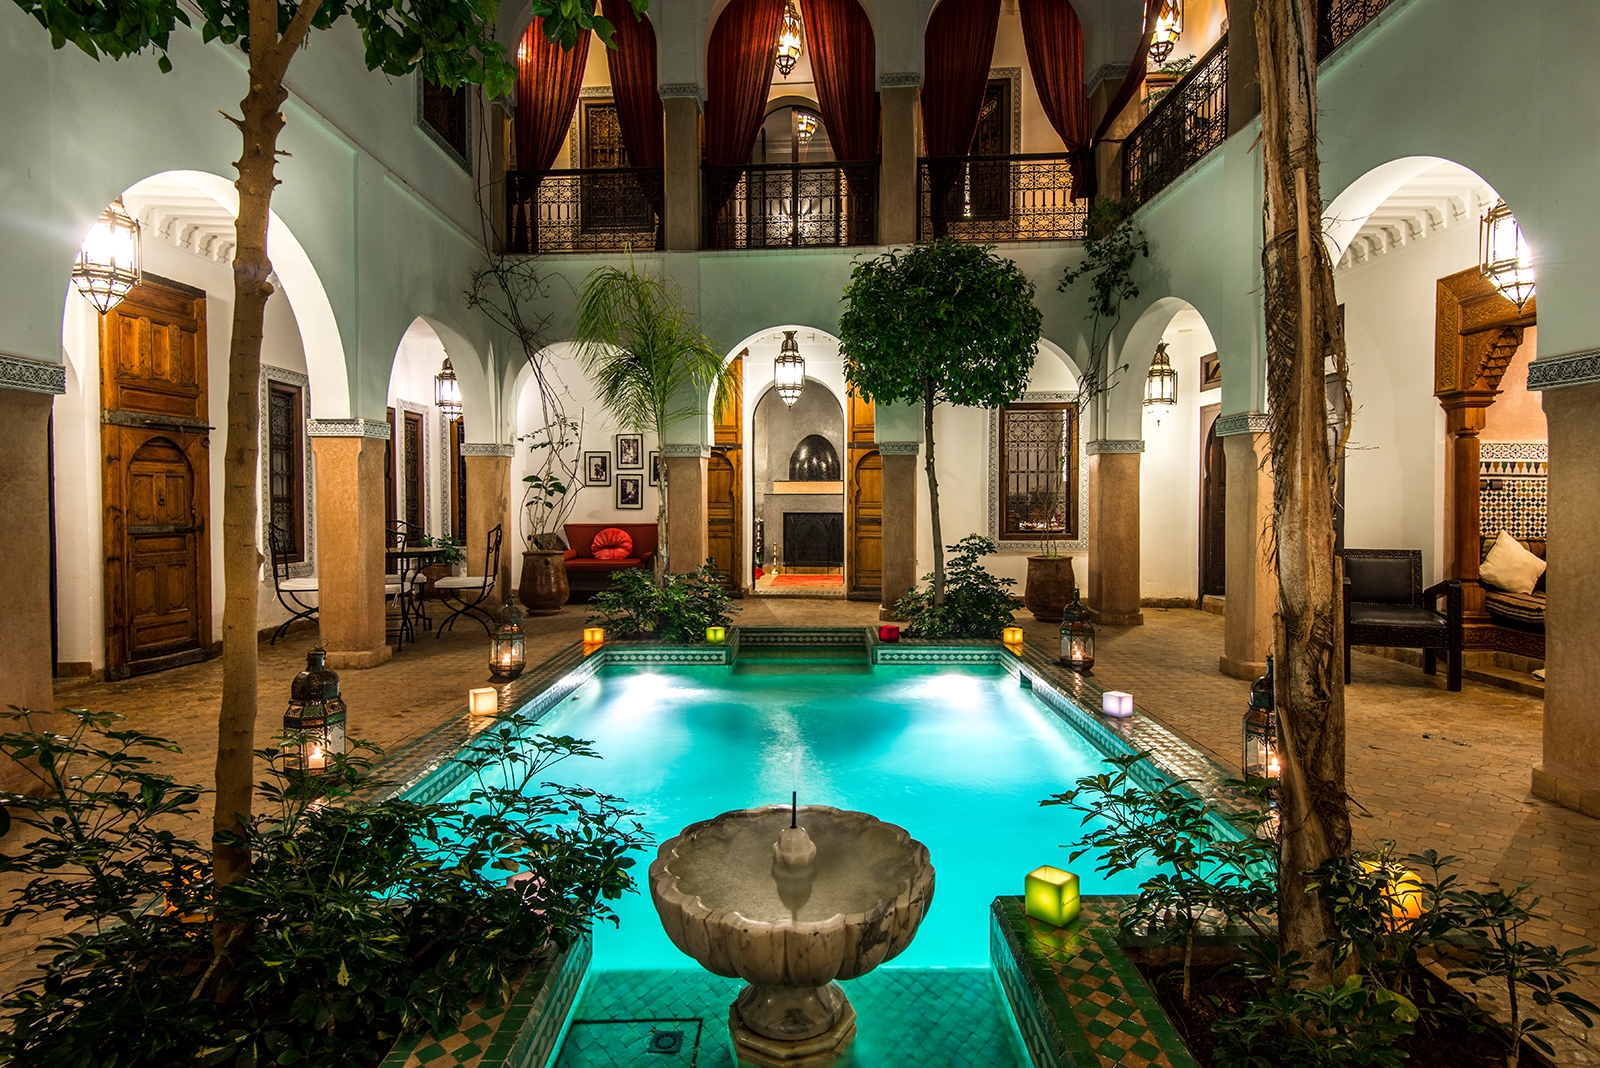 Medina mansion riad hotel, where to stay in Marrakech, Marrakech hotels, Travel to Marrakech, travel to Morocco, what to do in Marrakech, what to do in Morocco, Weekend getaway in Marrakech, Erin Busbee, Busbee Style, Beauty Over 40